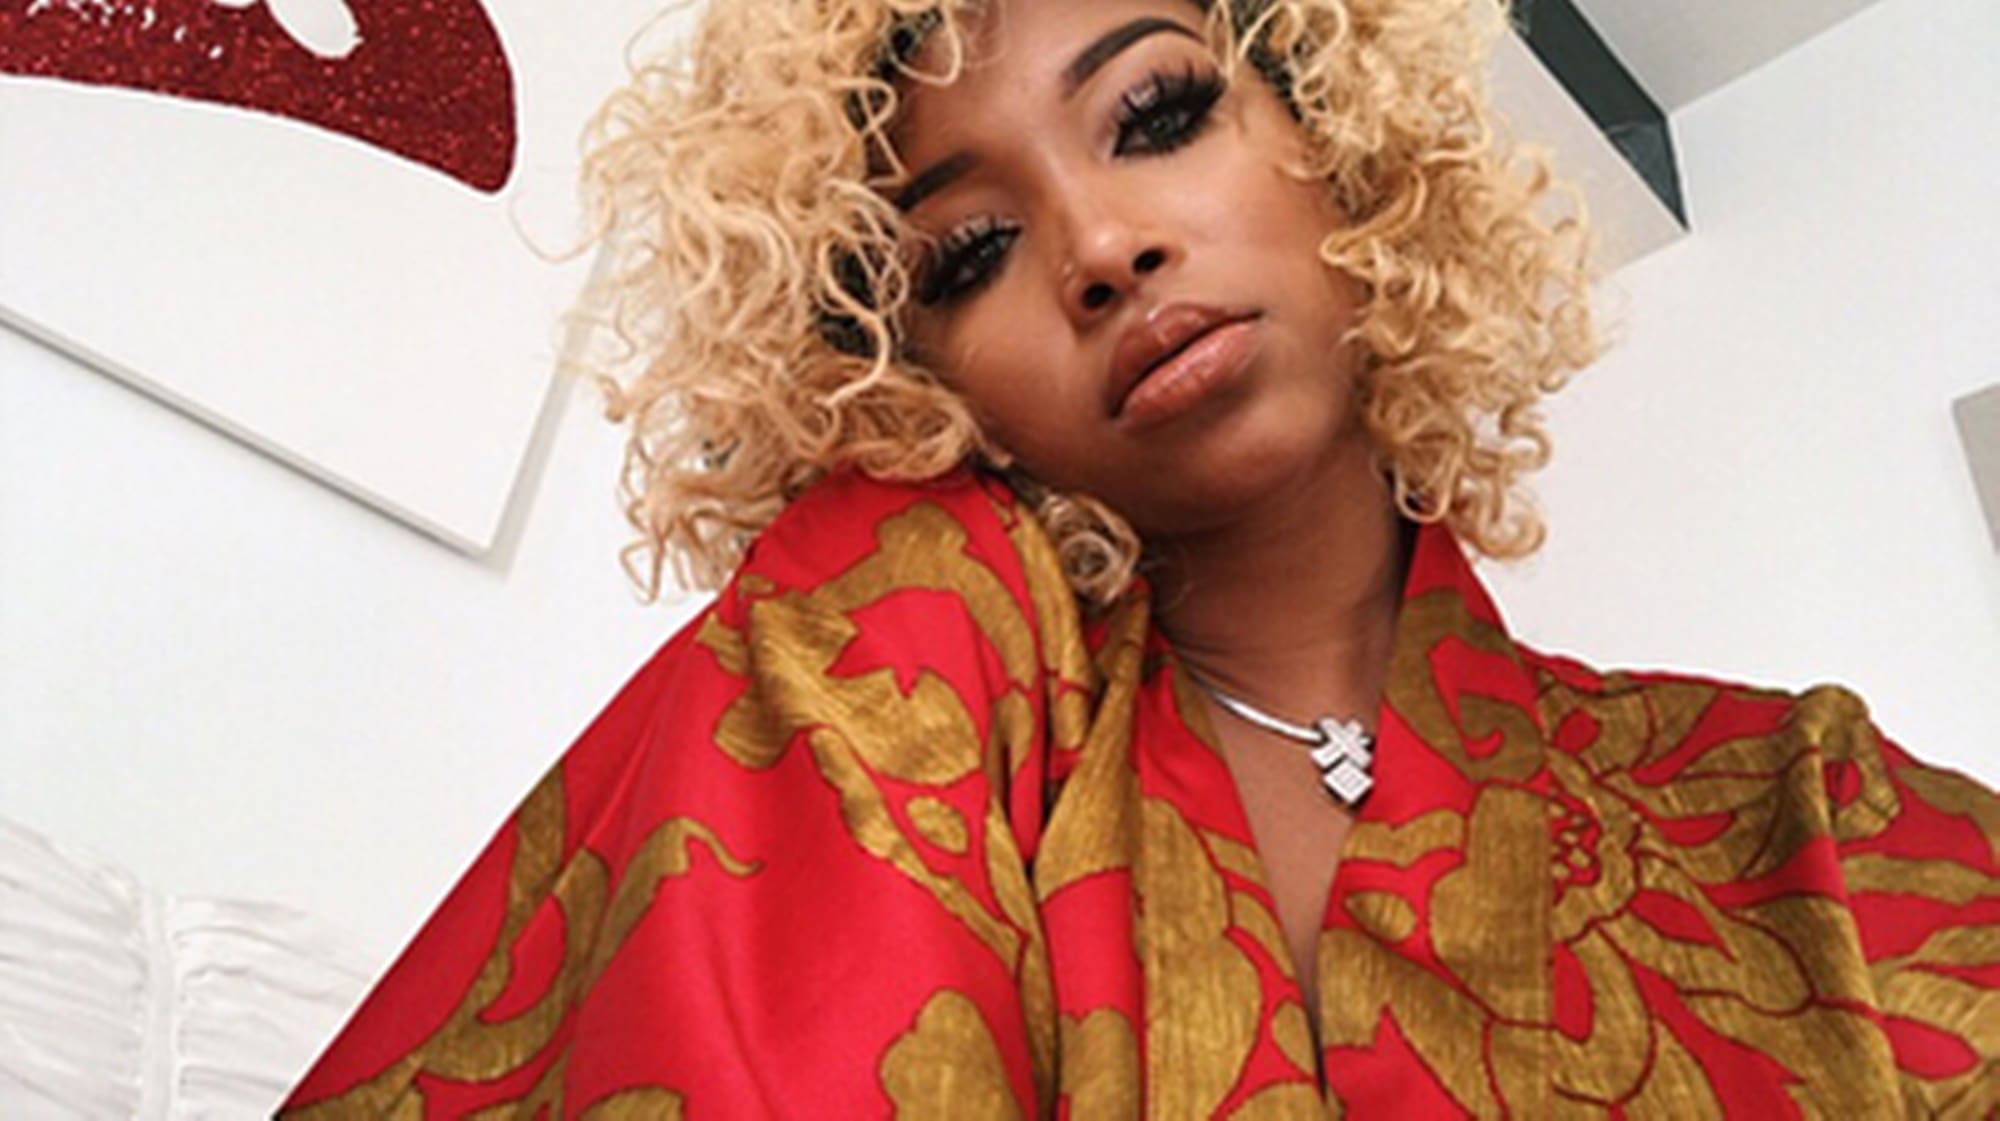 Tiny Harris' Daughter, Zonnique Pullins And Her BF Spend Christmas With Her Whole Family Following Her Vacay In The Bahamas - Fans Wonder Where T.I. Is